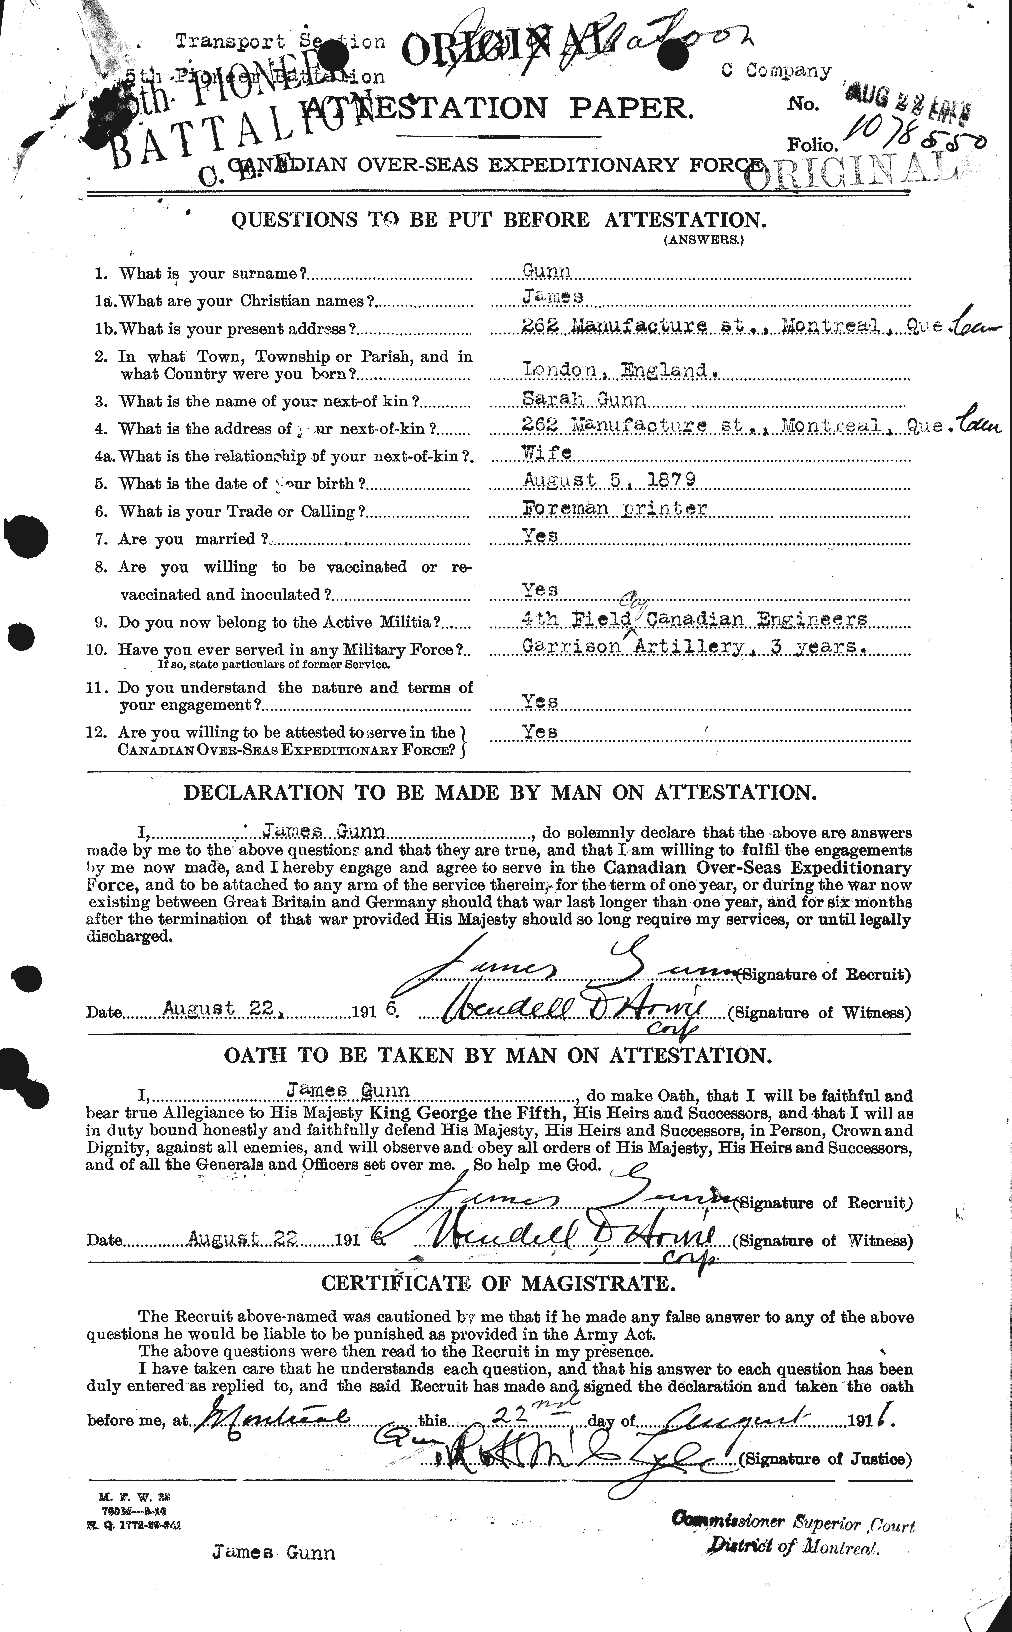 Personnel Records of the First World War - CEF 369266a